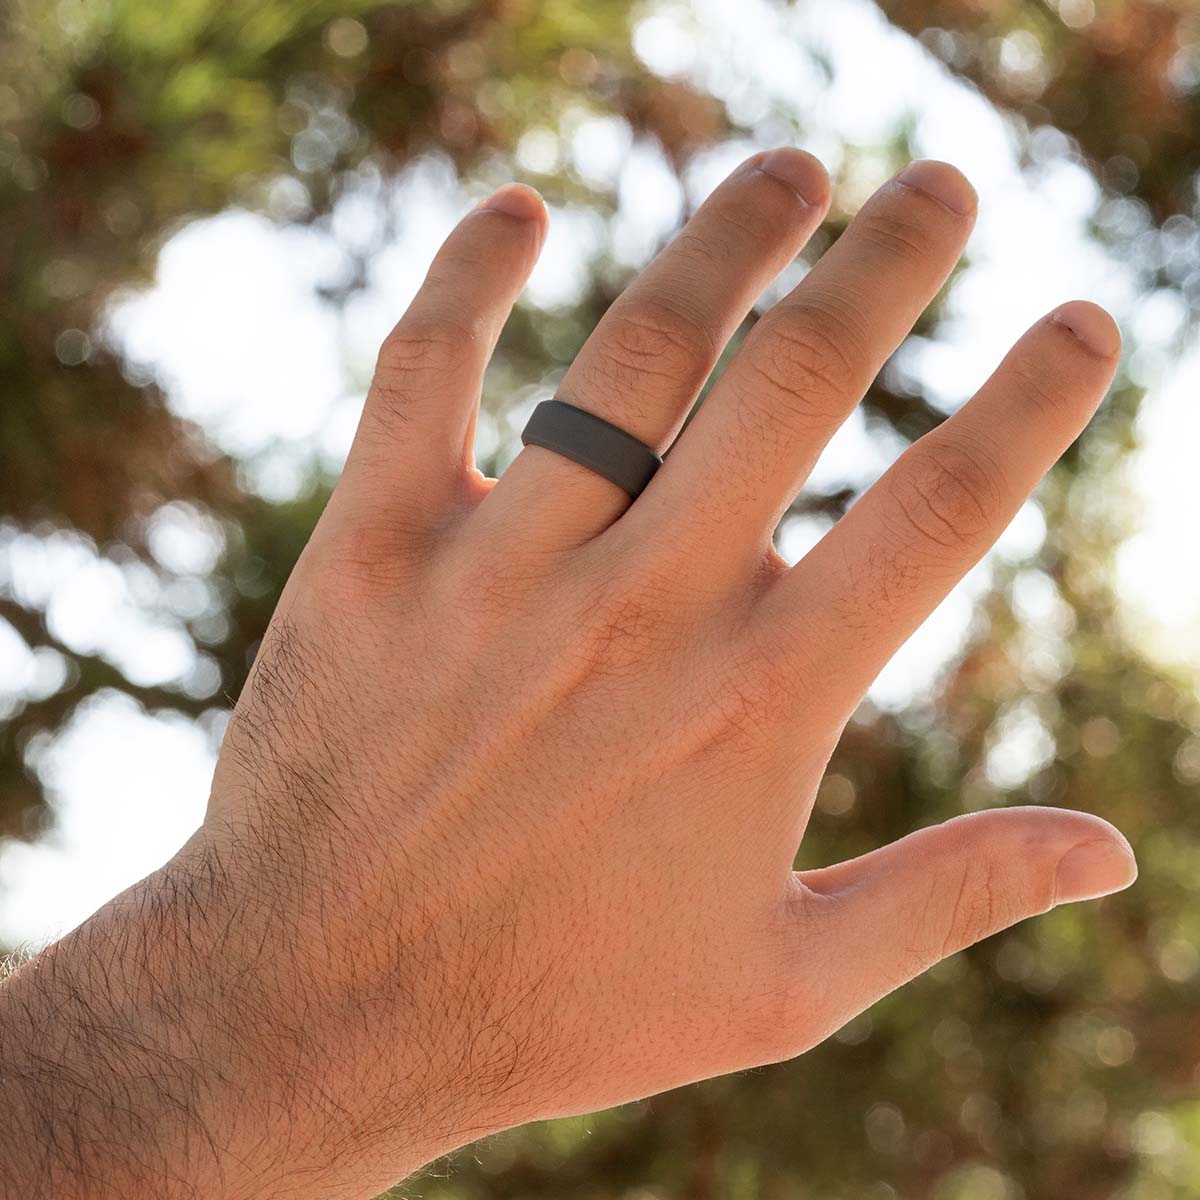 Male Hand wearing a gray rubber wedding ring